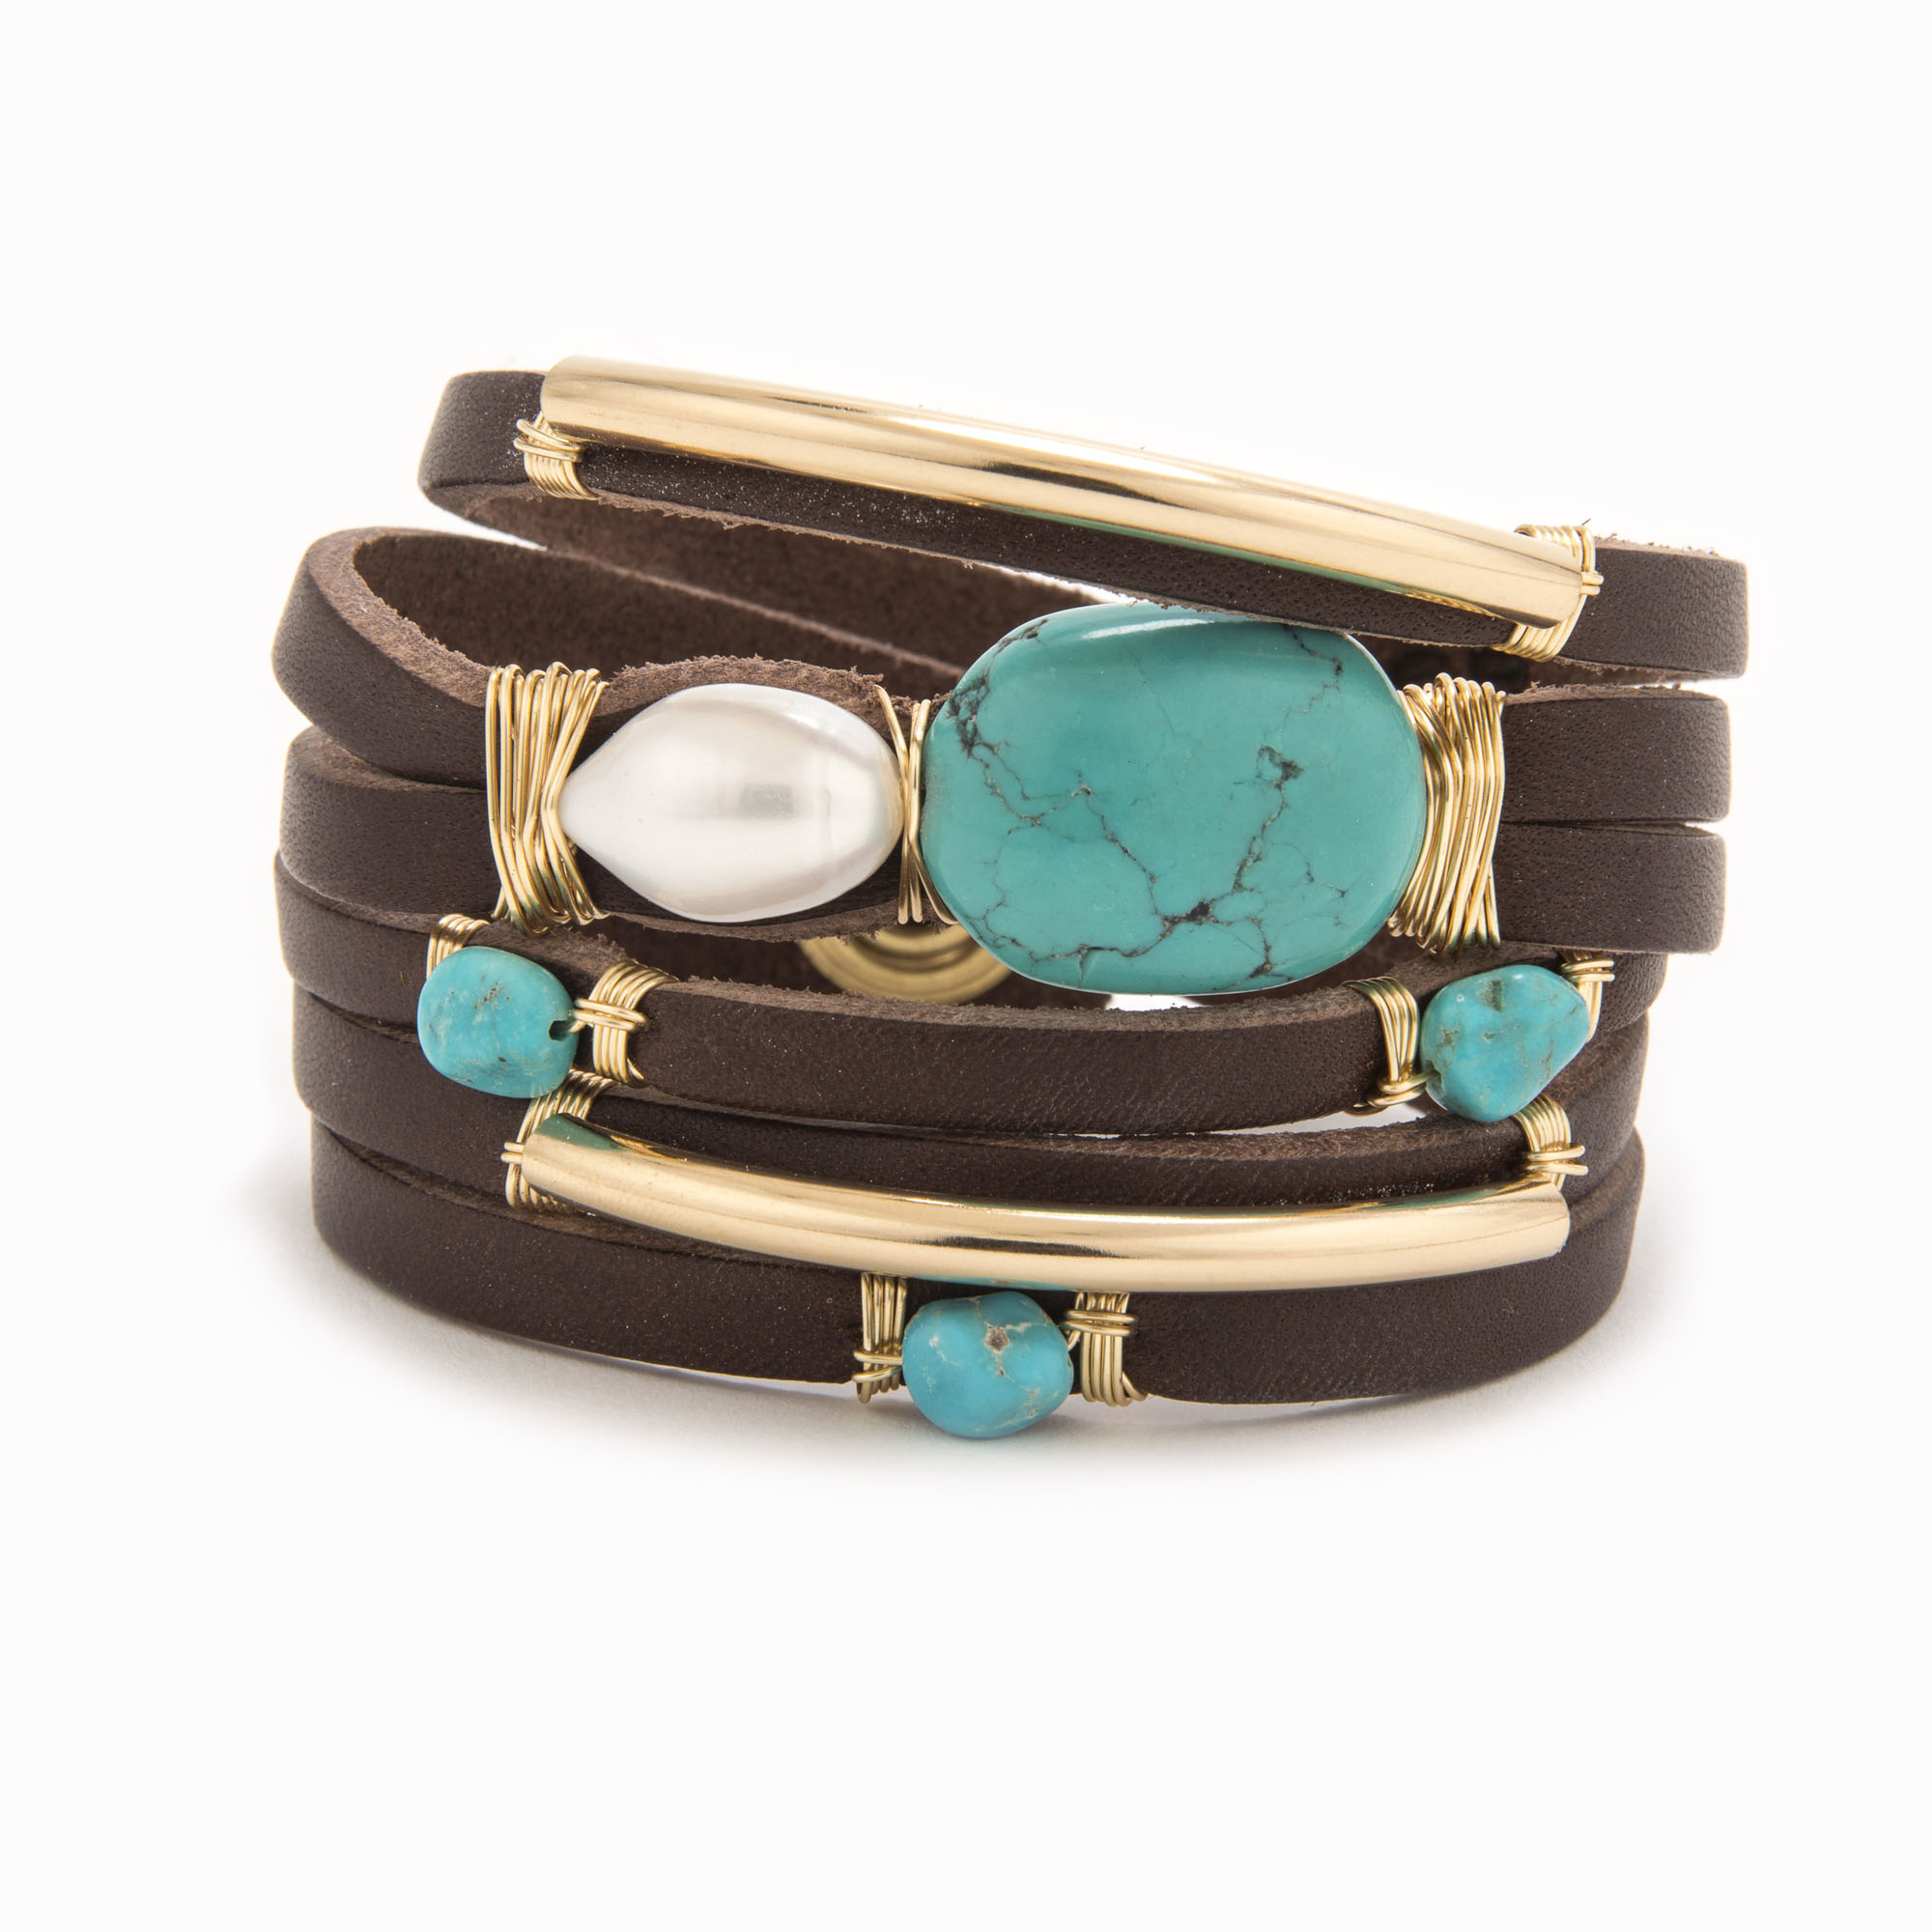 A brown-colored leather wrap bracelet with wire wrapped in 14k gold fill tubes, scattered turquoise, and fresh water pearl.